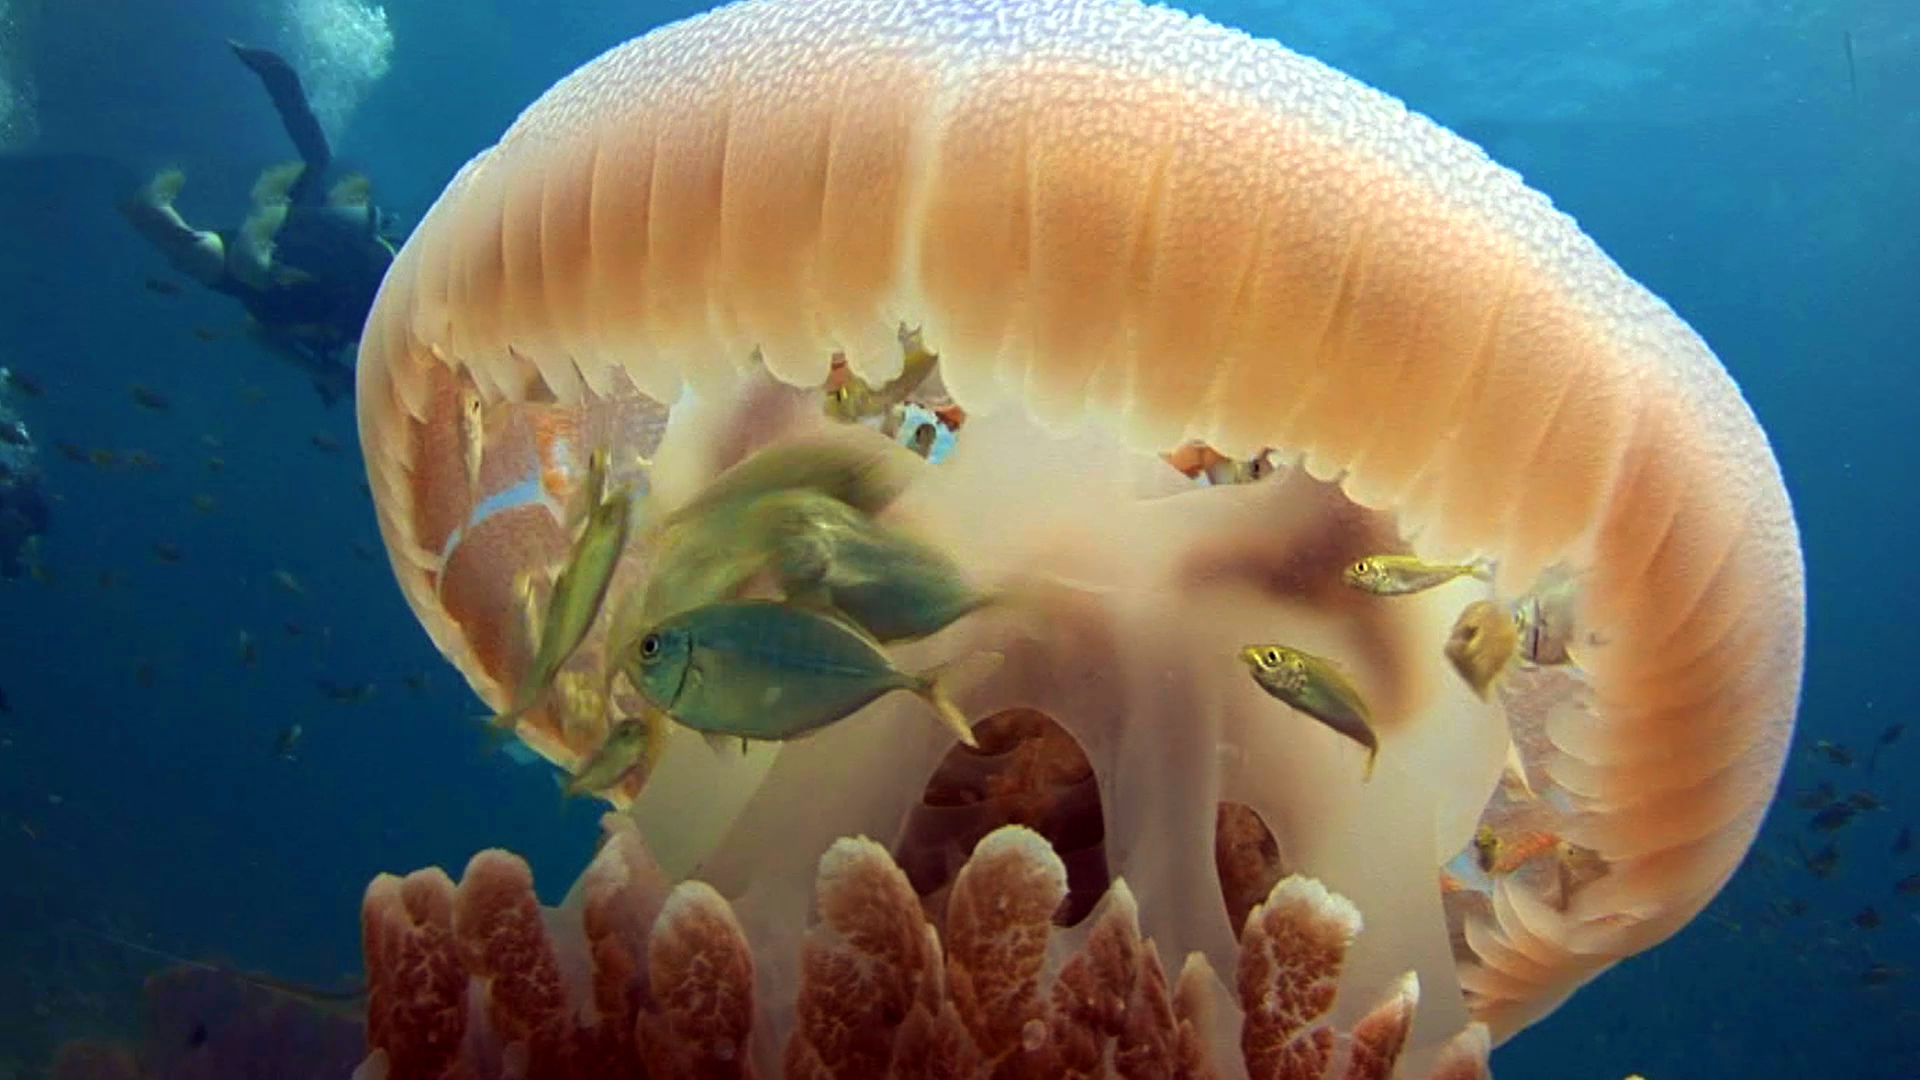 Baby fish hide from predators under a jellyfish's translucent bell ...